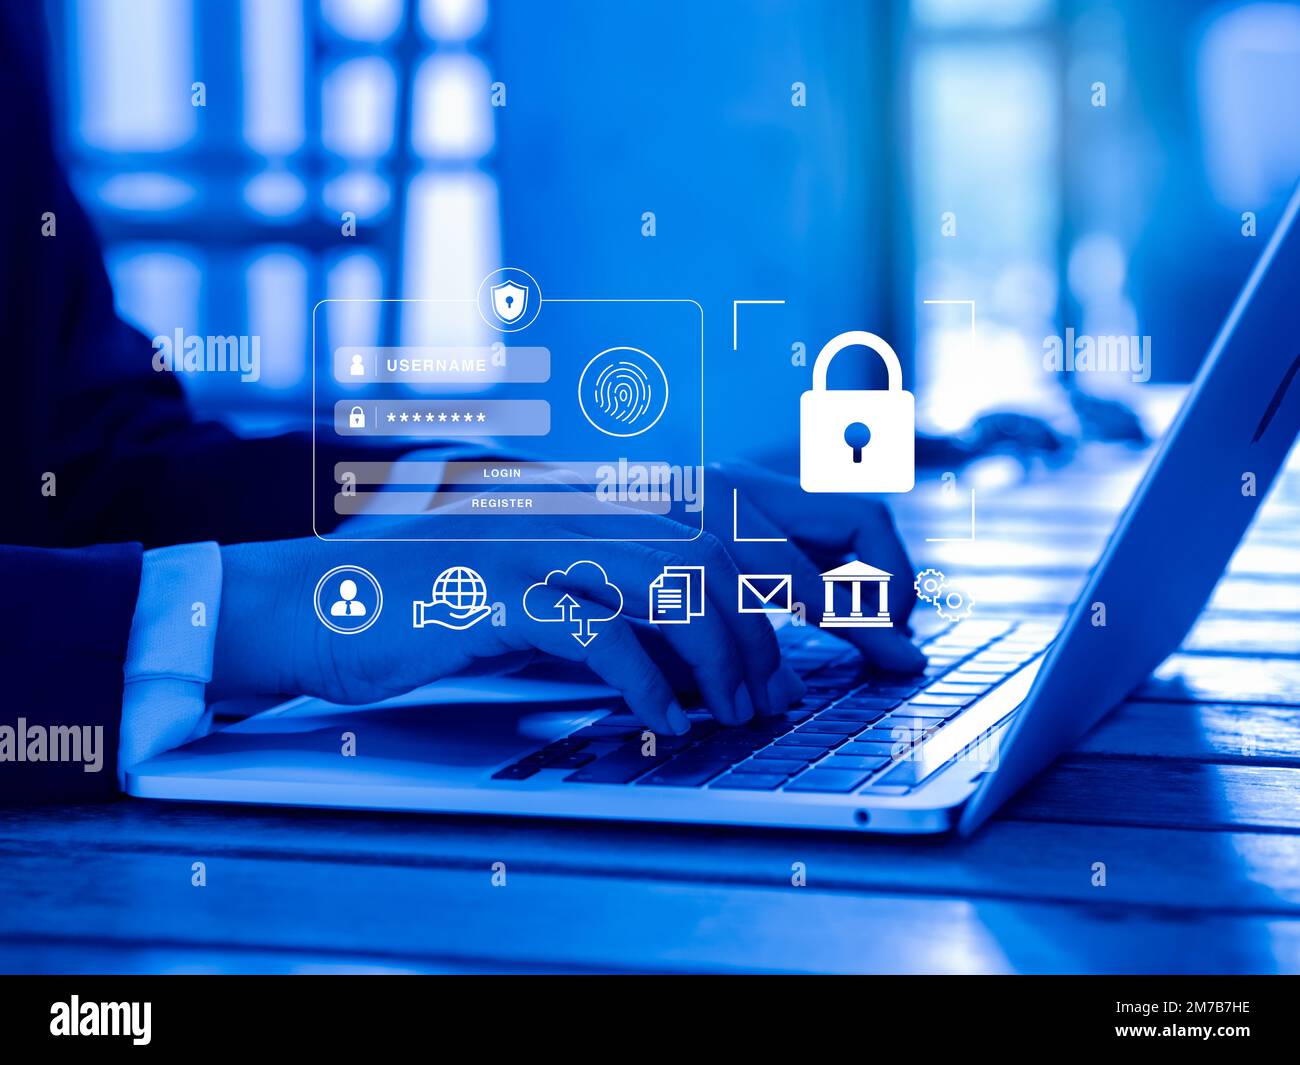 Cybersecurity system technology, login and password, global network security and secured internet access concepts. Lock icon and login page appearing Stock Photo